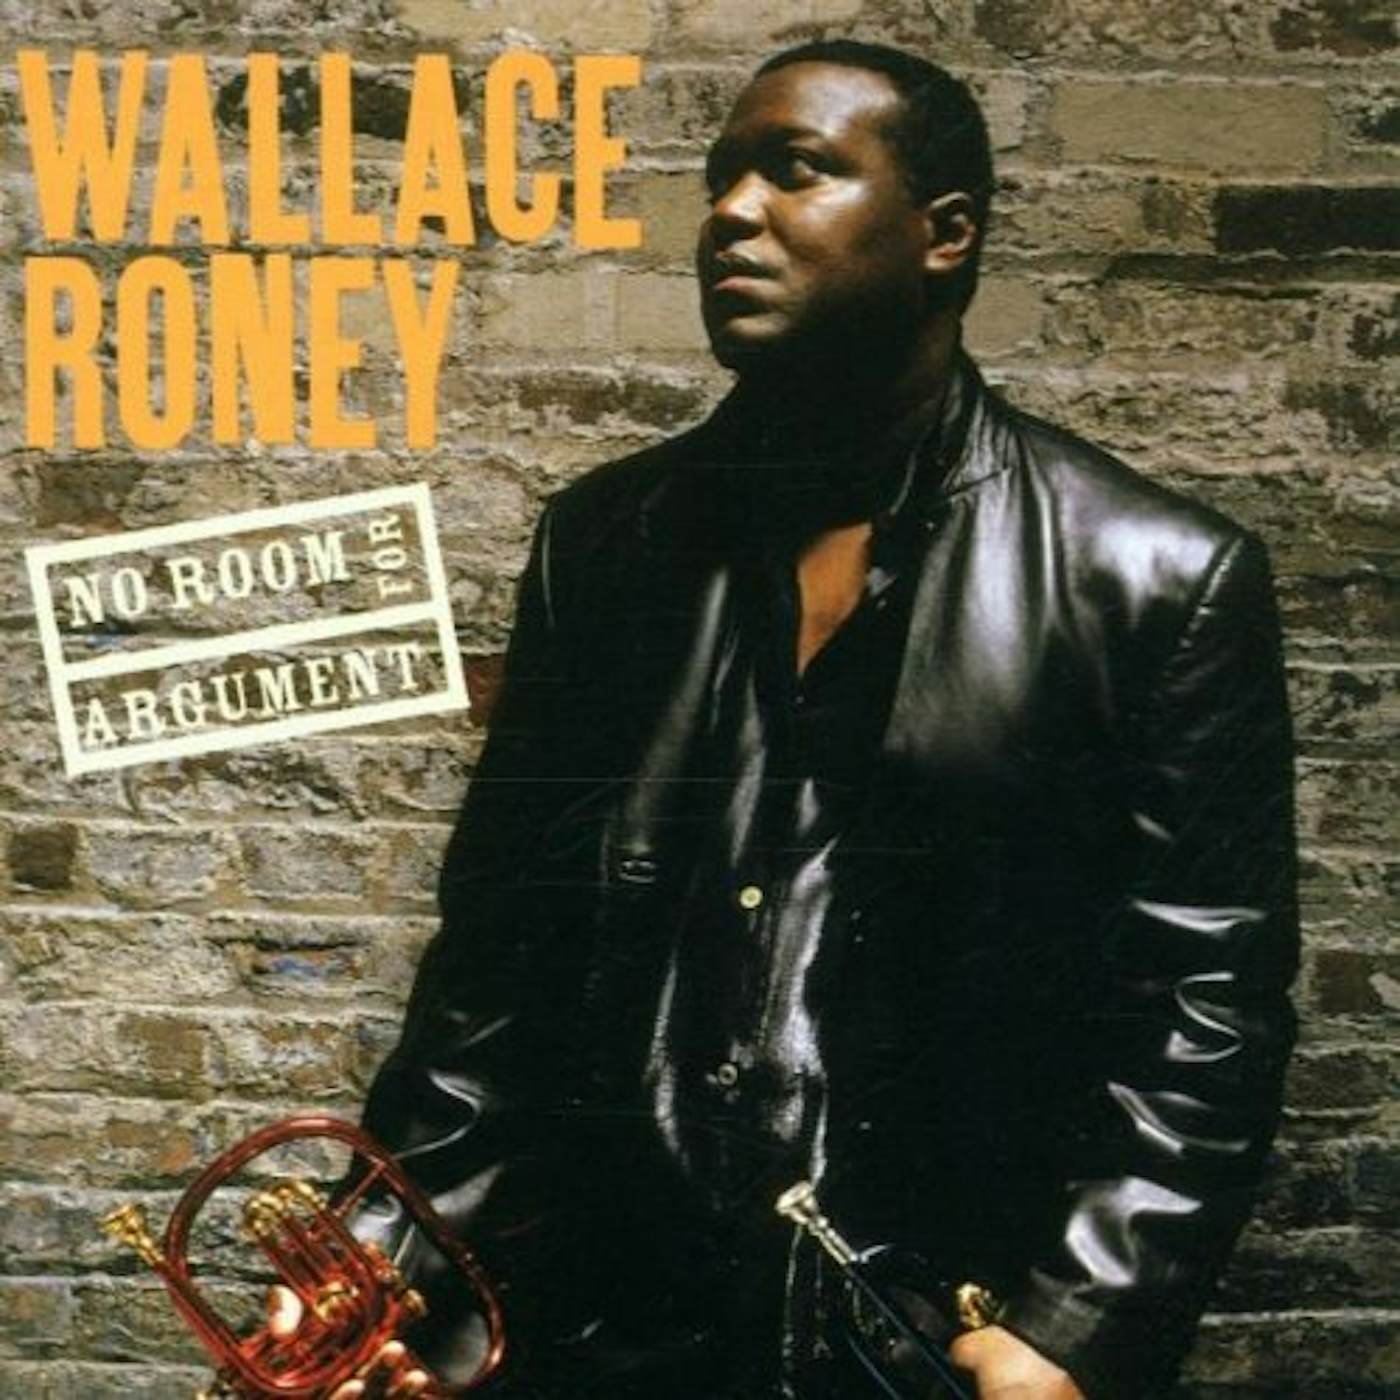 Wallace Roney NO ROOM FOR ARGUMENT CD